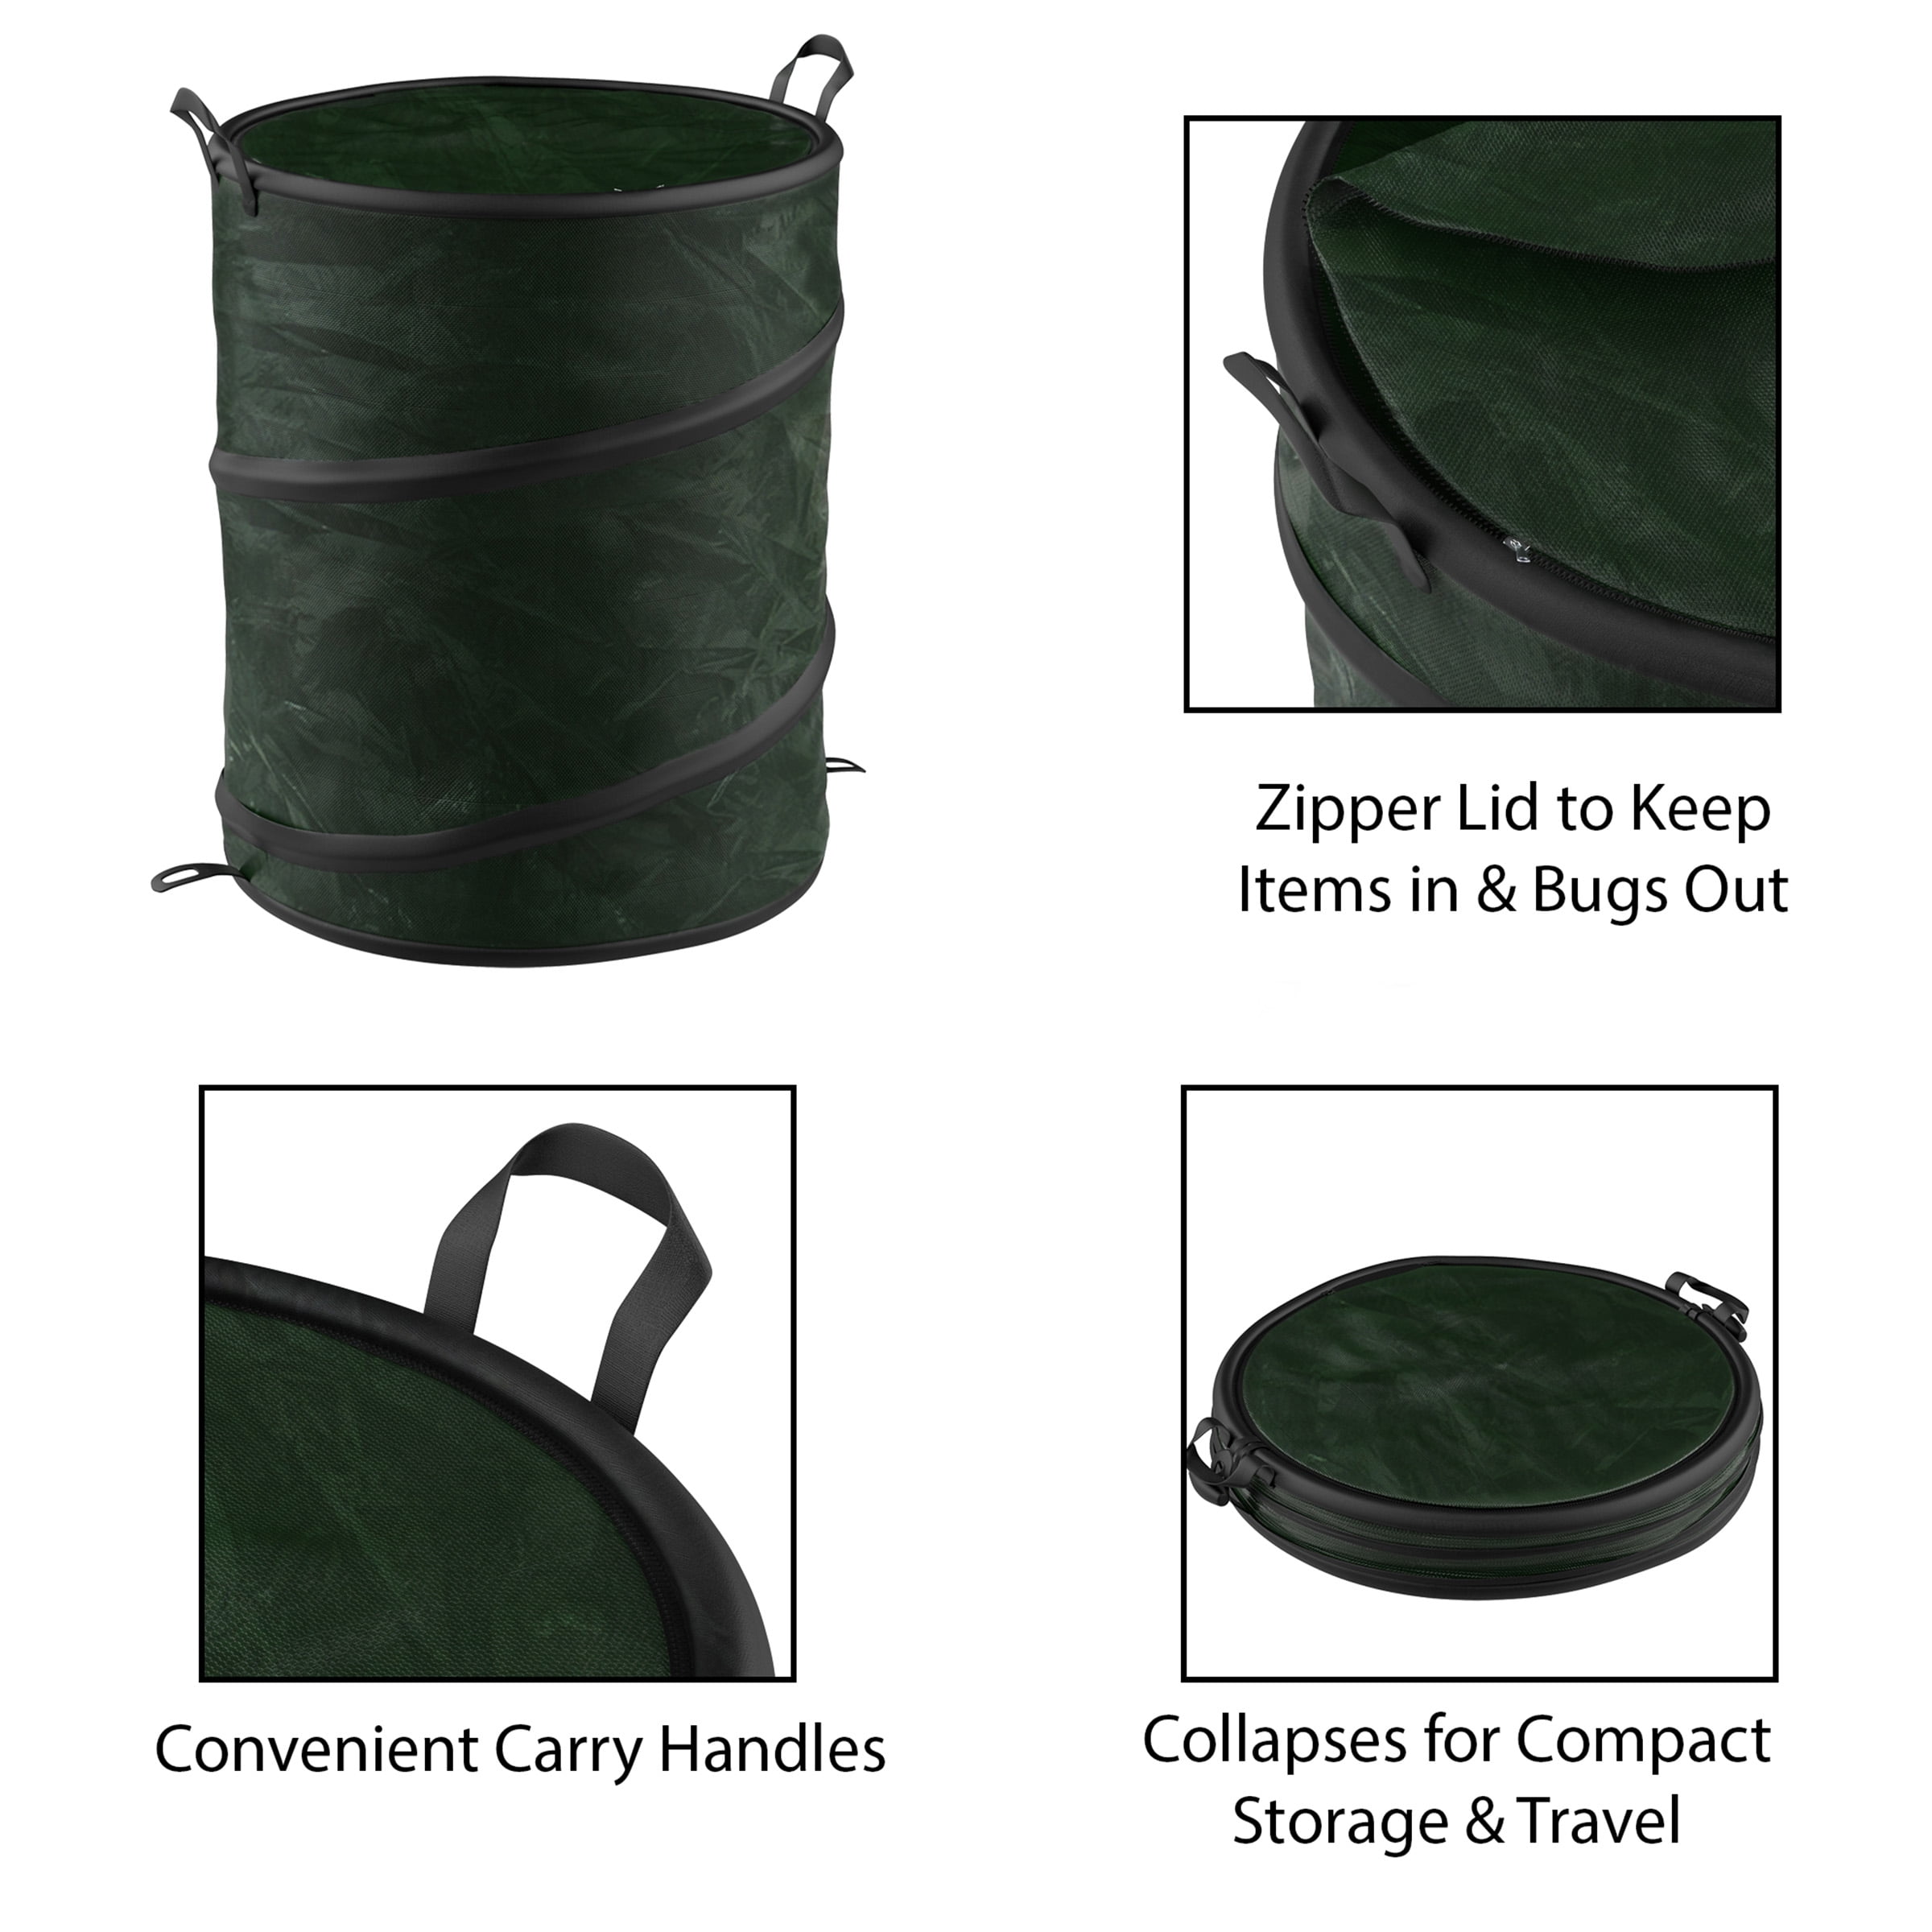 Anthracite Outdoor Garbage Can with Lid 18 x 18 x 31 : D250-DL0